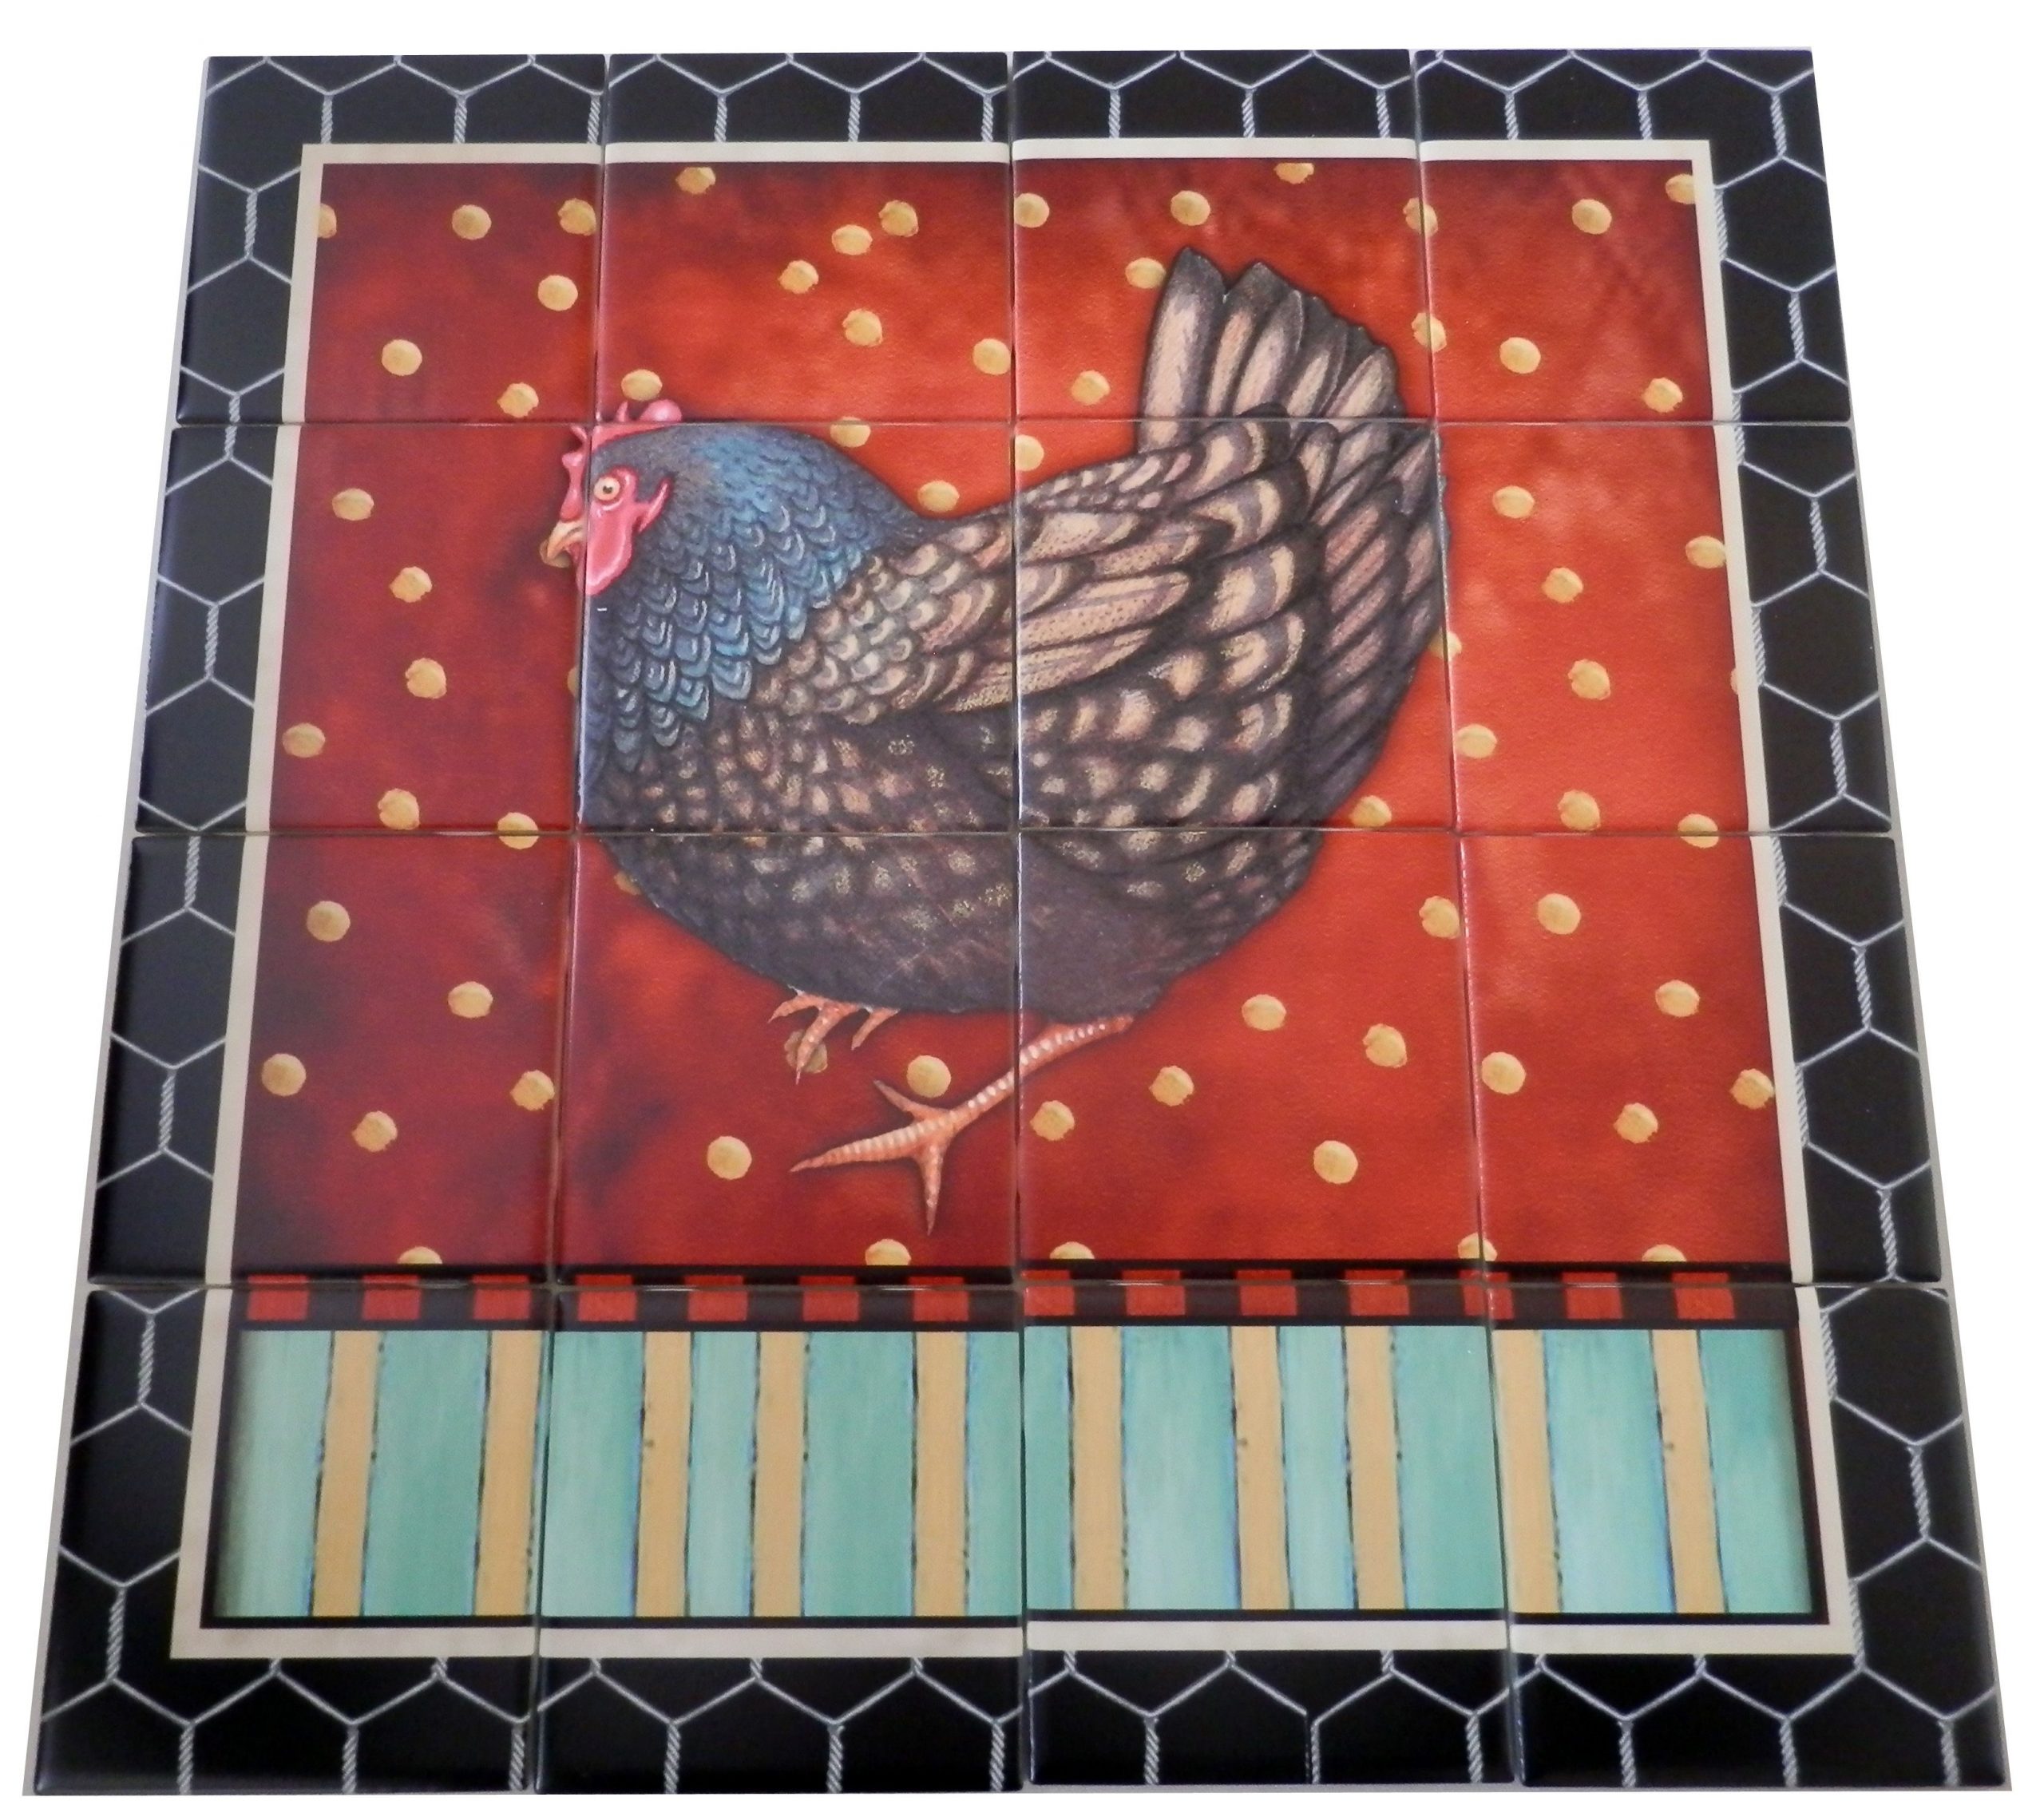 Decorative Tile With Roosters-Fancy Rooster 3-Tile Mural à Rooster Kitchen Tile 